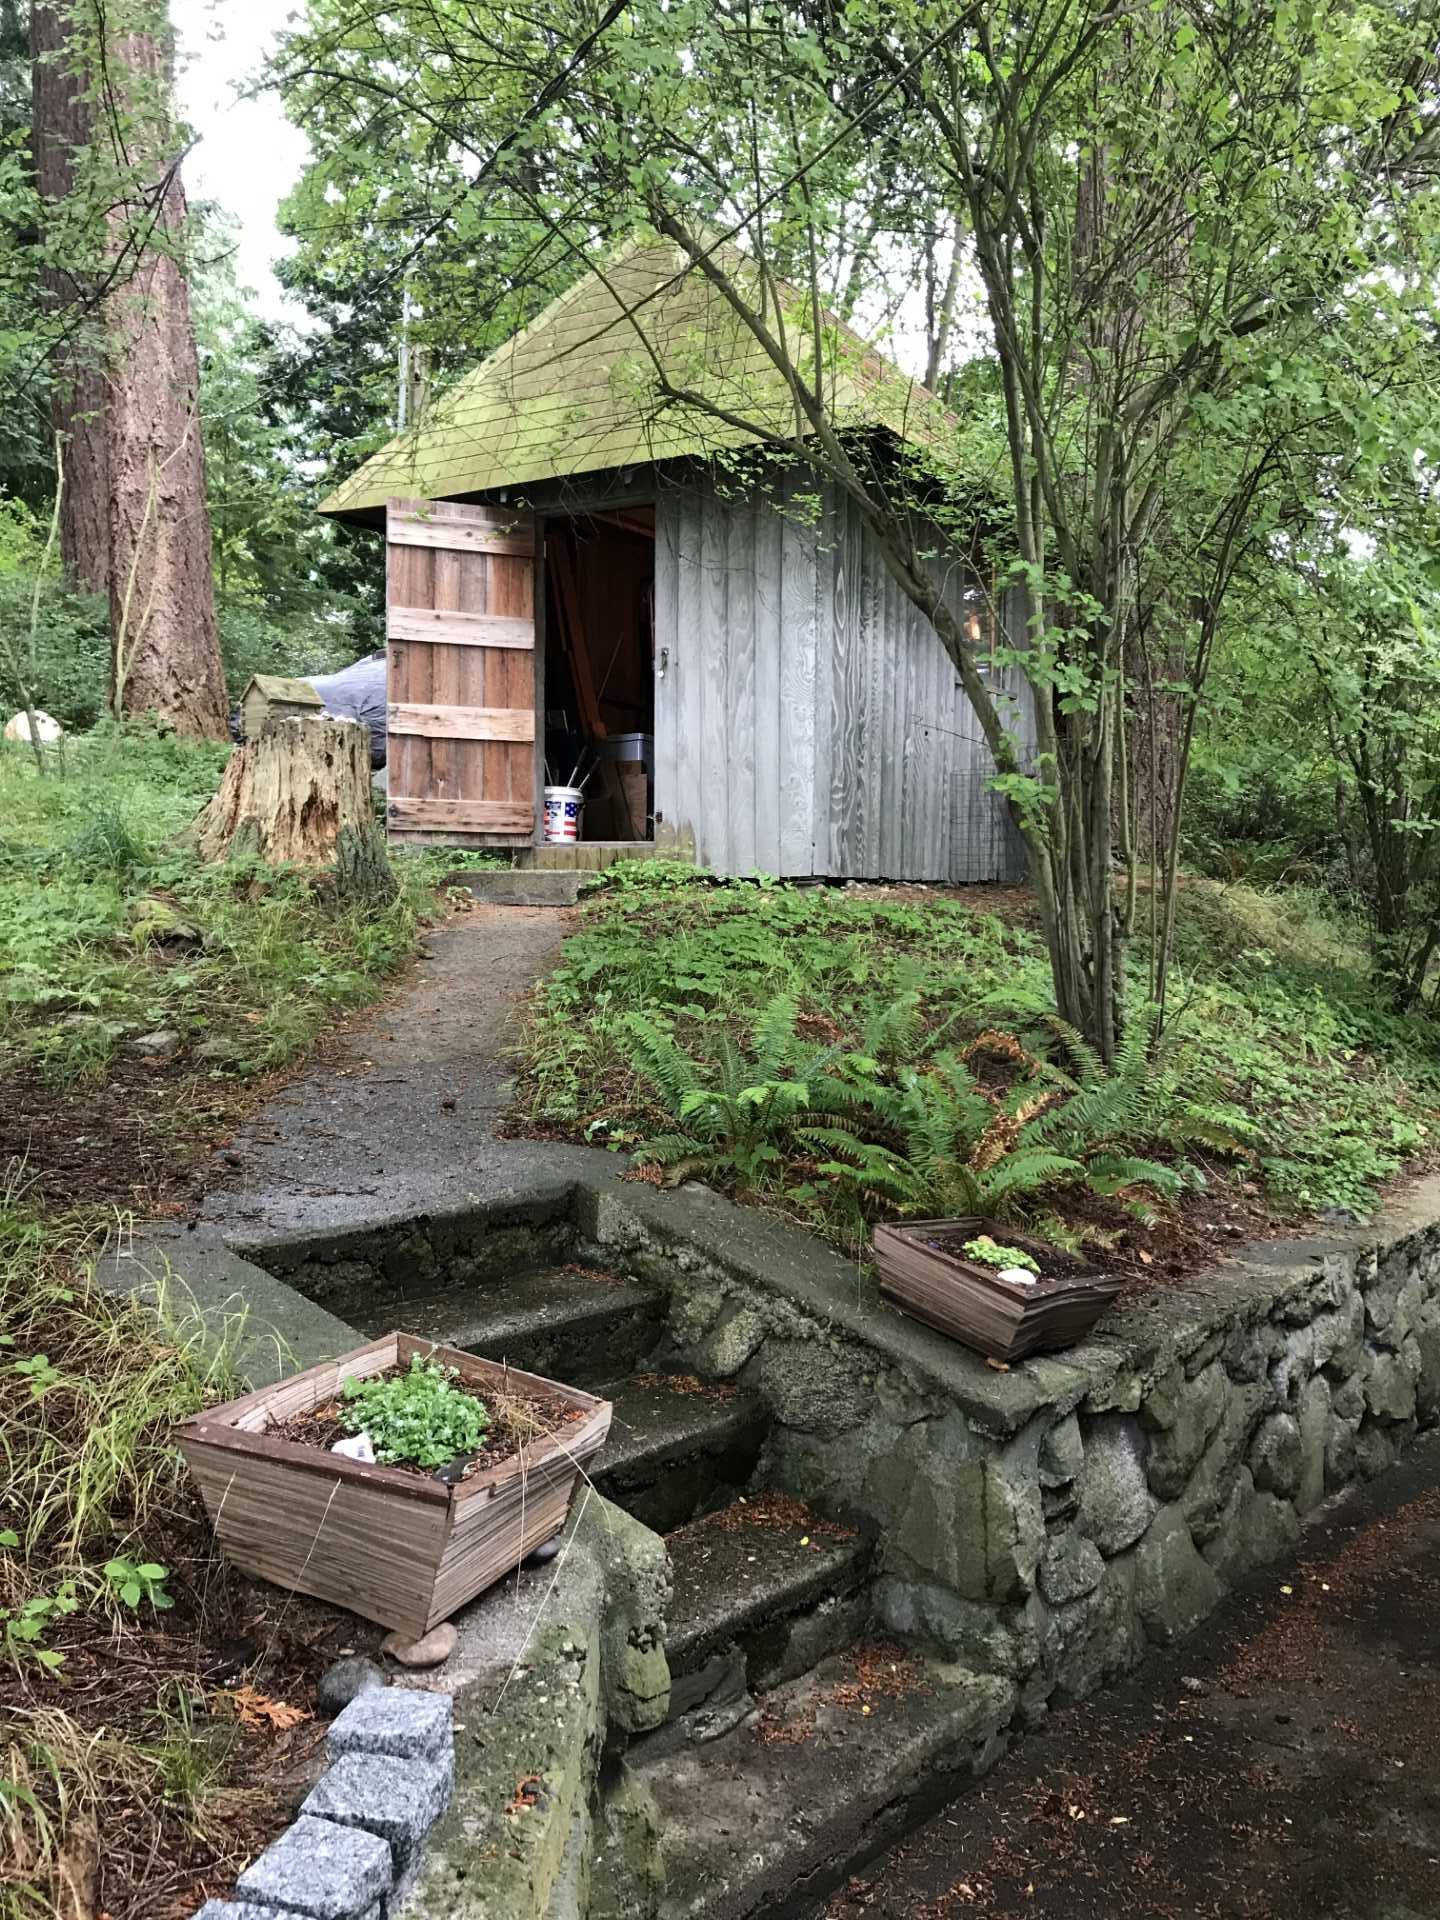 BEFORE - SHED Architecture & Design has shared photos of a two-story bunkhouse on Guemes Island, Washington State, that provides additional sleeping accommodations for a family's cabin.